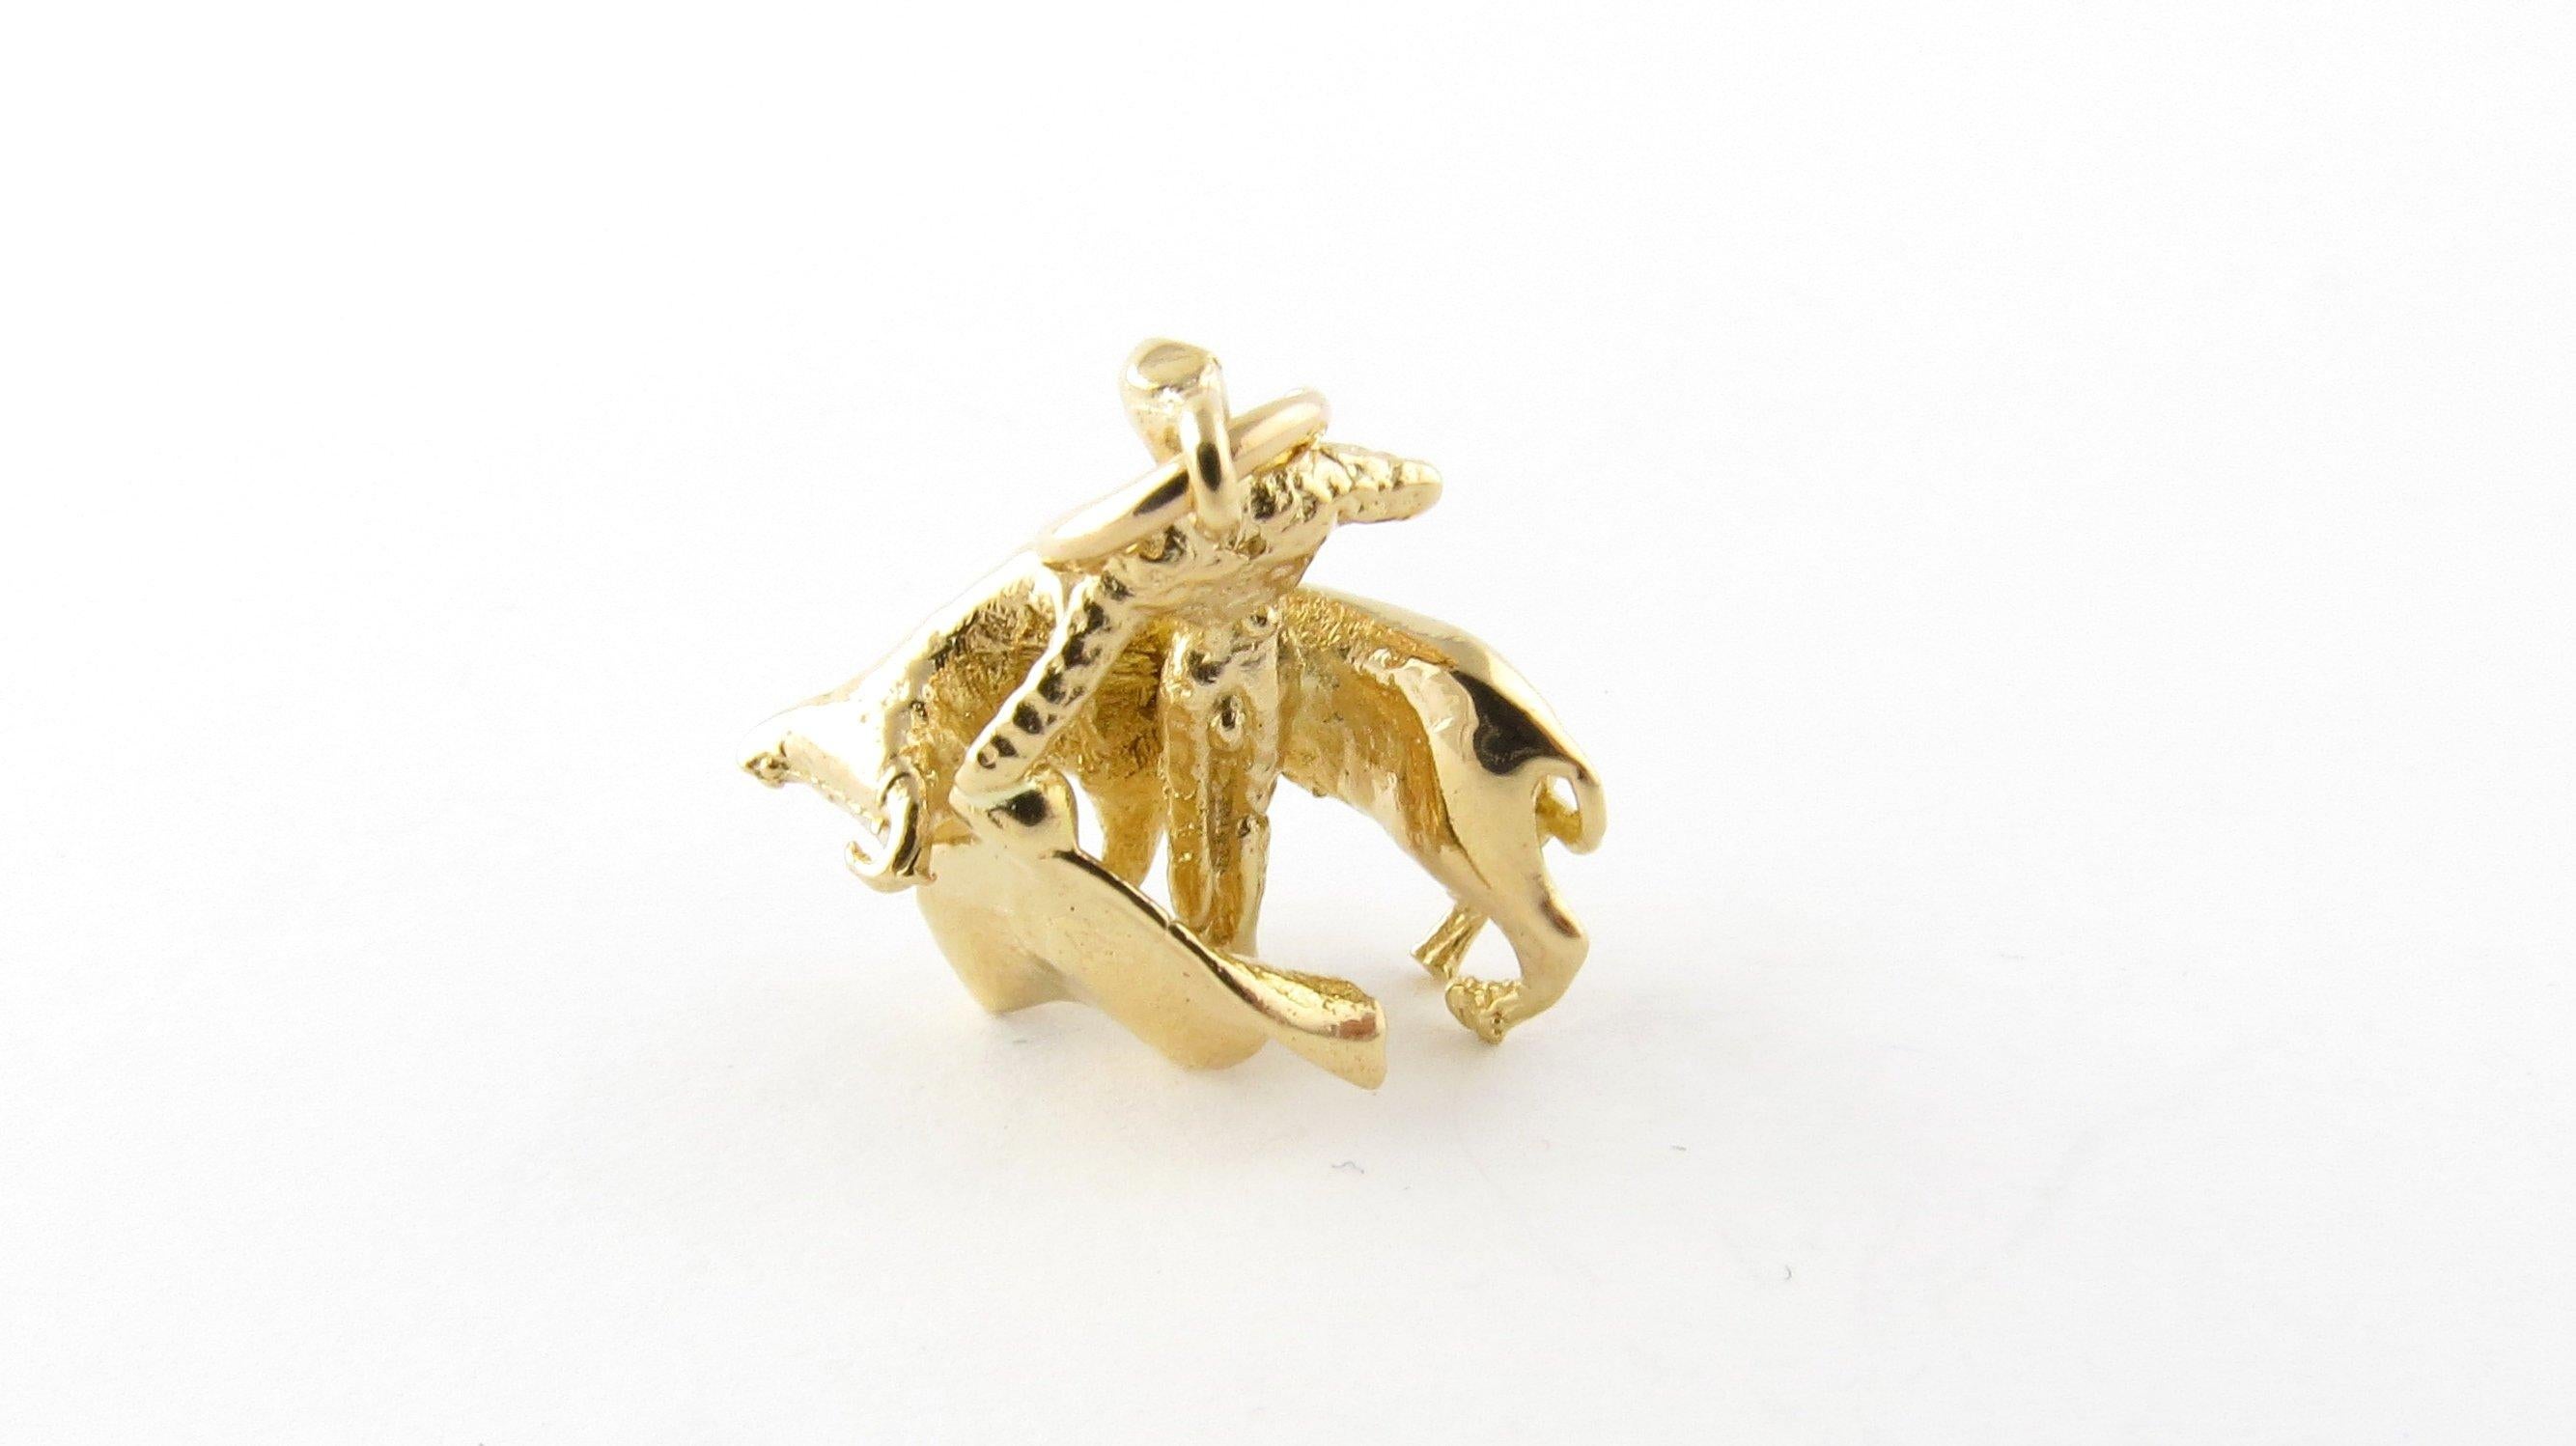 Vintage 18 Karat Yellow Gold Matador and Bull Charm
Toro! 
This lovely 3D charm features a matador and bull beautifully detailed in 18K yellow gold. 
Size: 17 mm x 17 mm (actual charm) 
Weight: 3.4 dwt. / 5.4 gr. 
Hallmark: Acid tested for 18K gold.